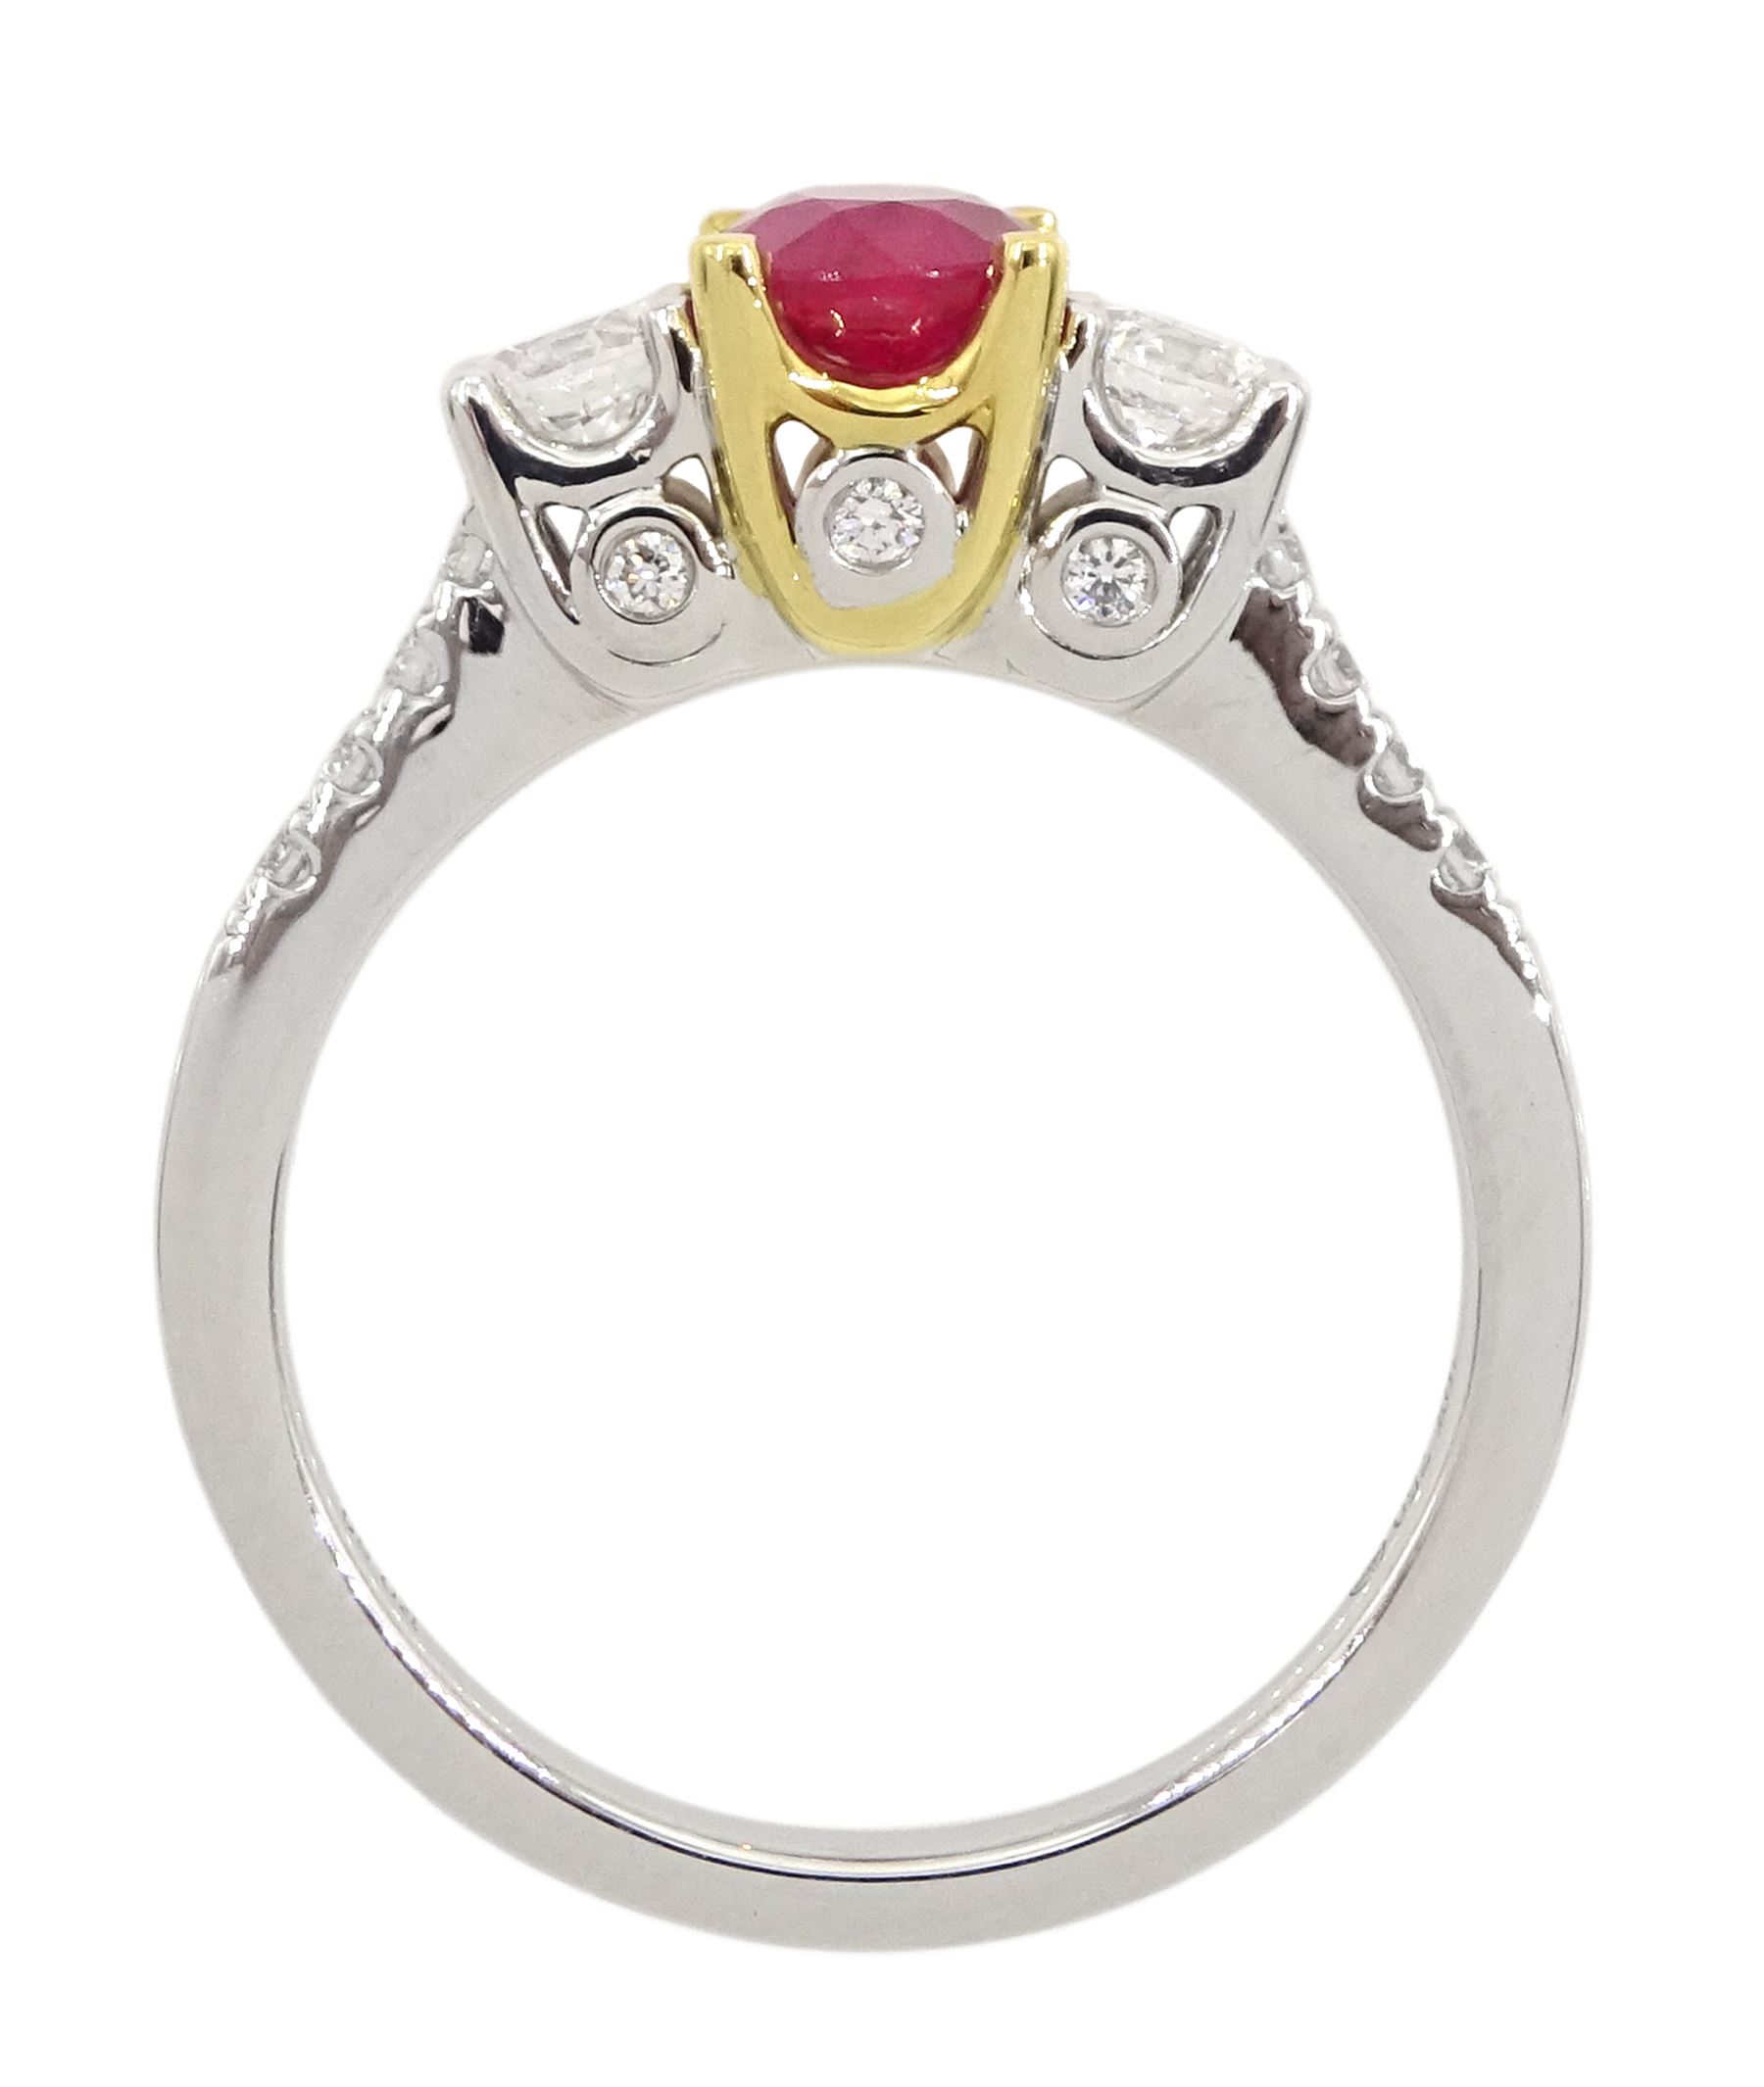 18ct white gold three stone oval ruby and round brilliant cut diamond ring - Image 4 of 4